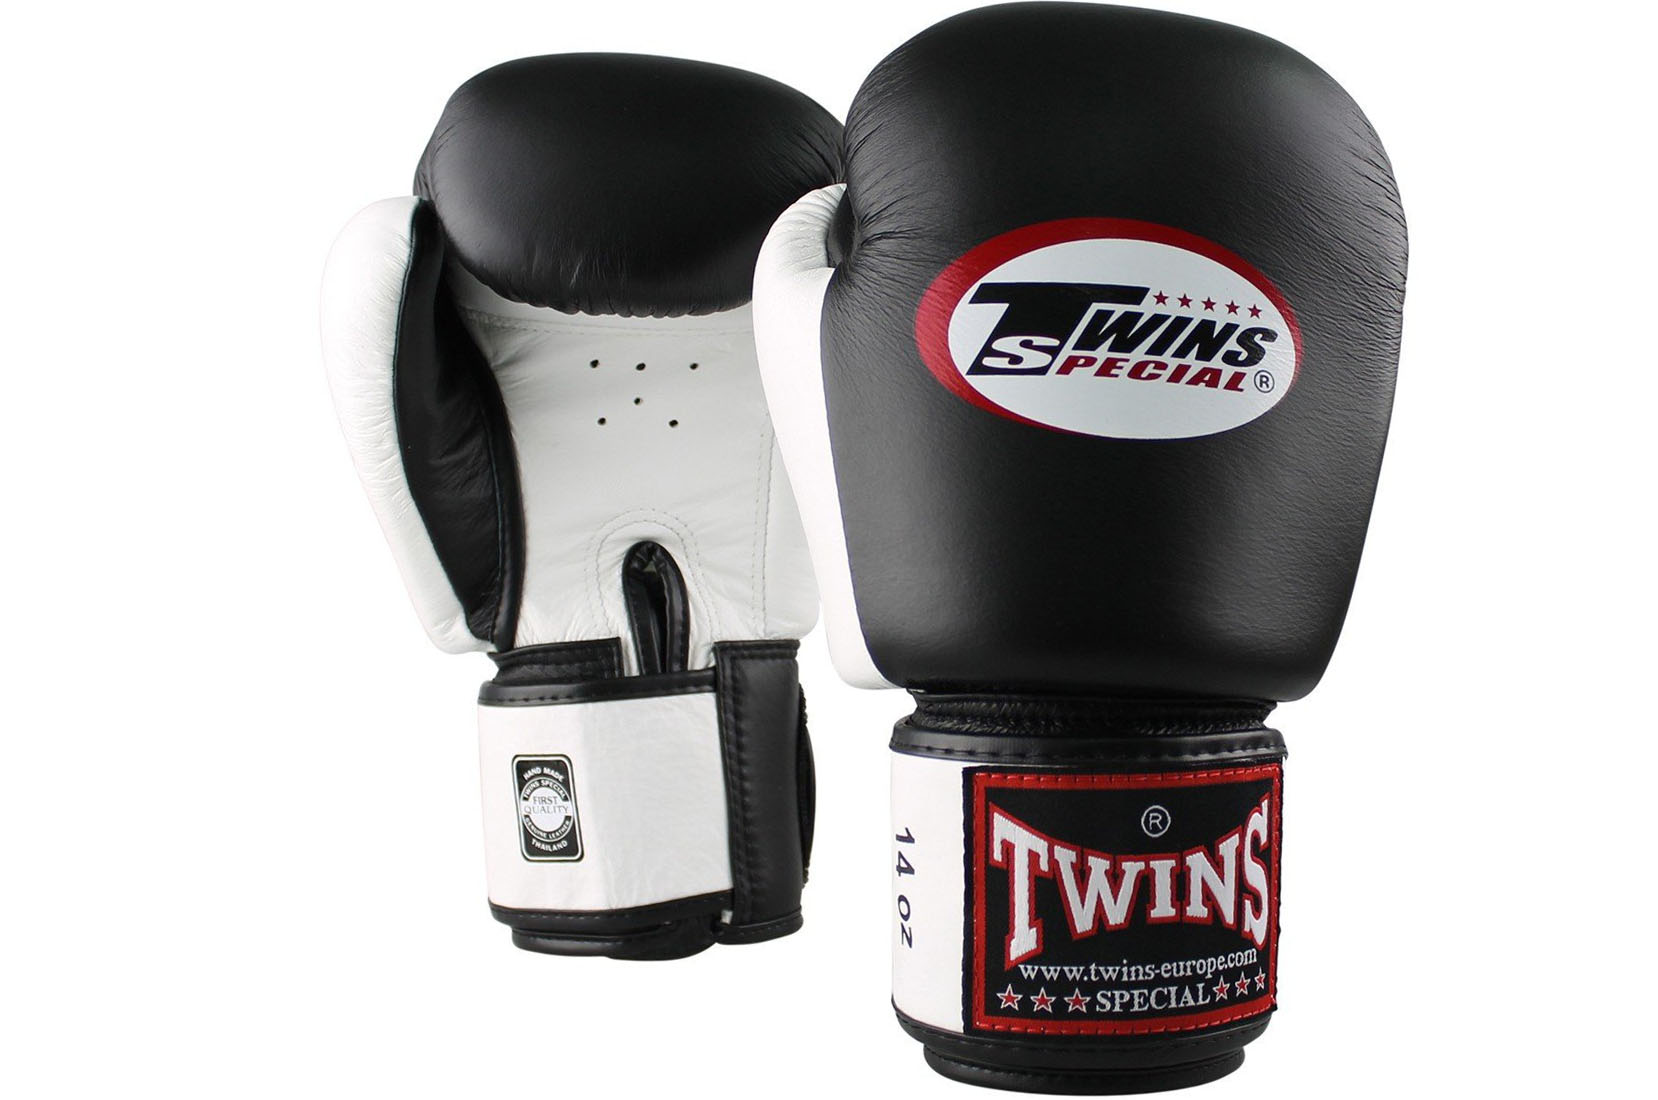 Twins Special BGVL-3 Vectro Strap Fight MMA Martial Arts Muay Thai Boxing Gloves 